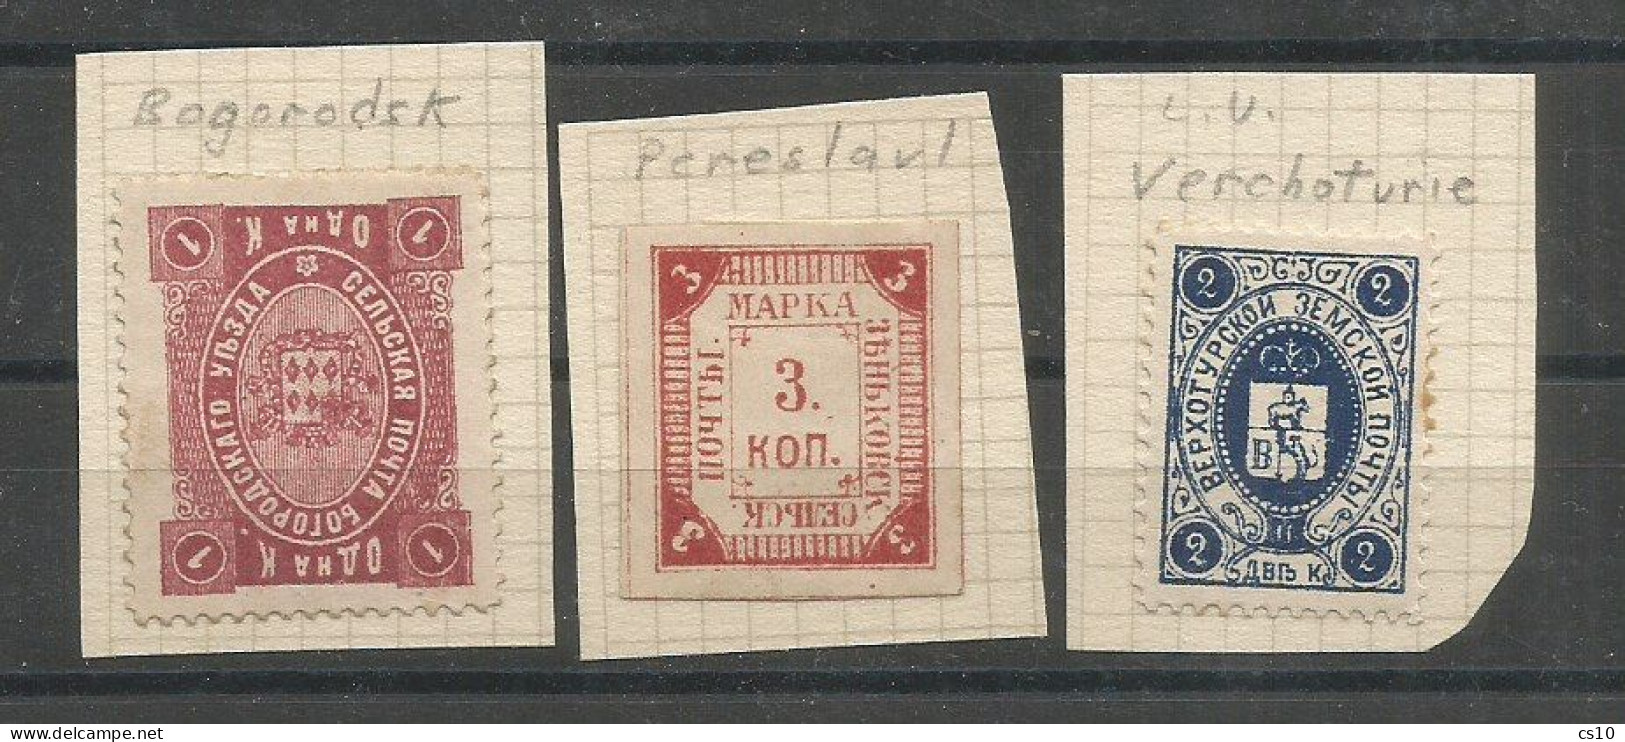 Old Russia Empire & Area #13 Scans Study Lot Of 490 Pcs Mint/Used Including Suomi Finland Levant, Some Piece, Imperf - Gebraucht